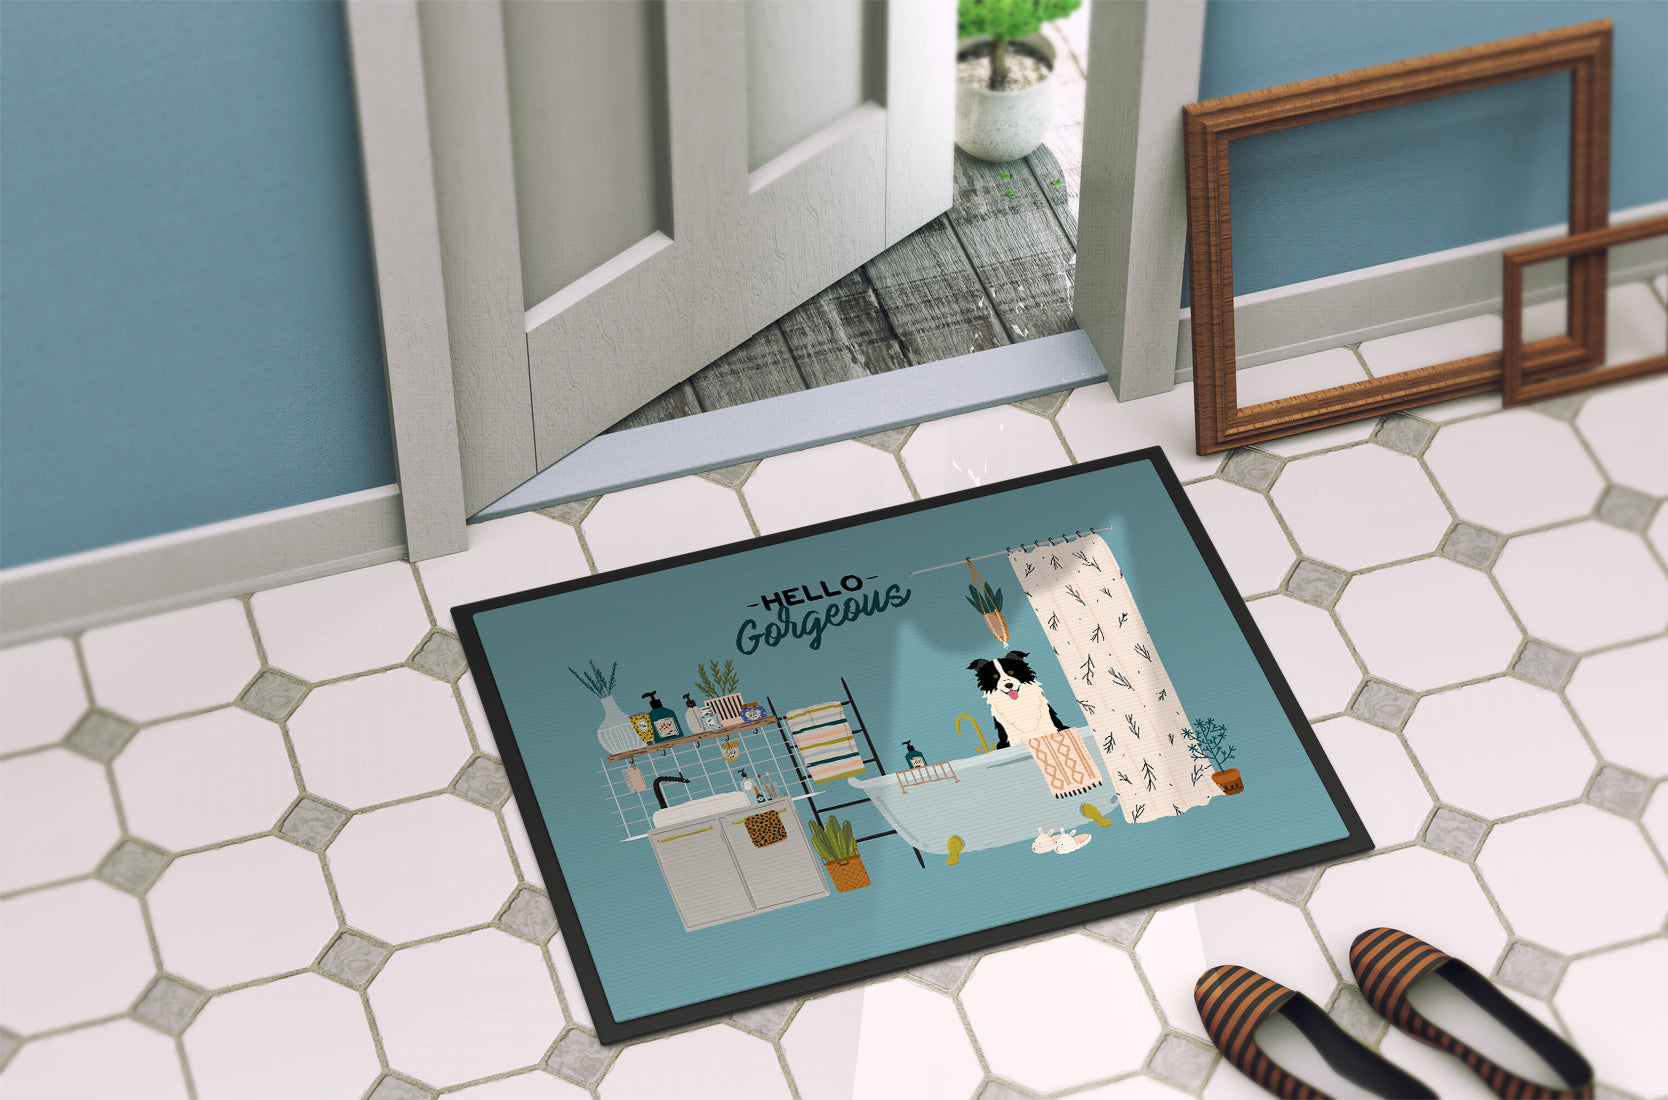 Black White Border Collie in Bathtub Indoor or Outdoor Mat 18x27 CK7540MAT - the-store.com